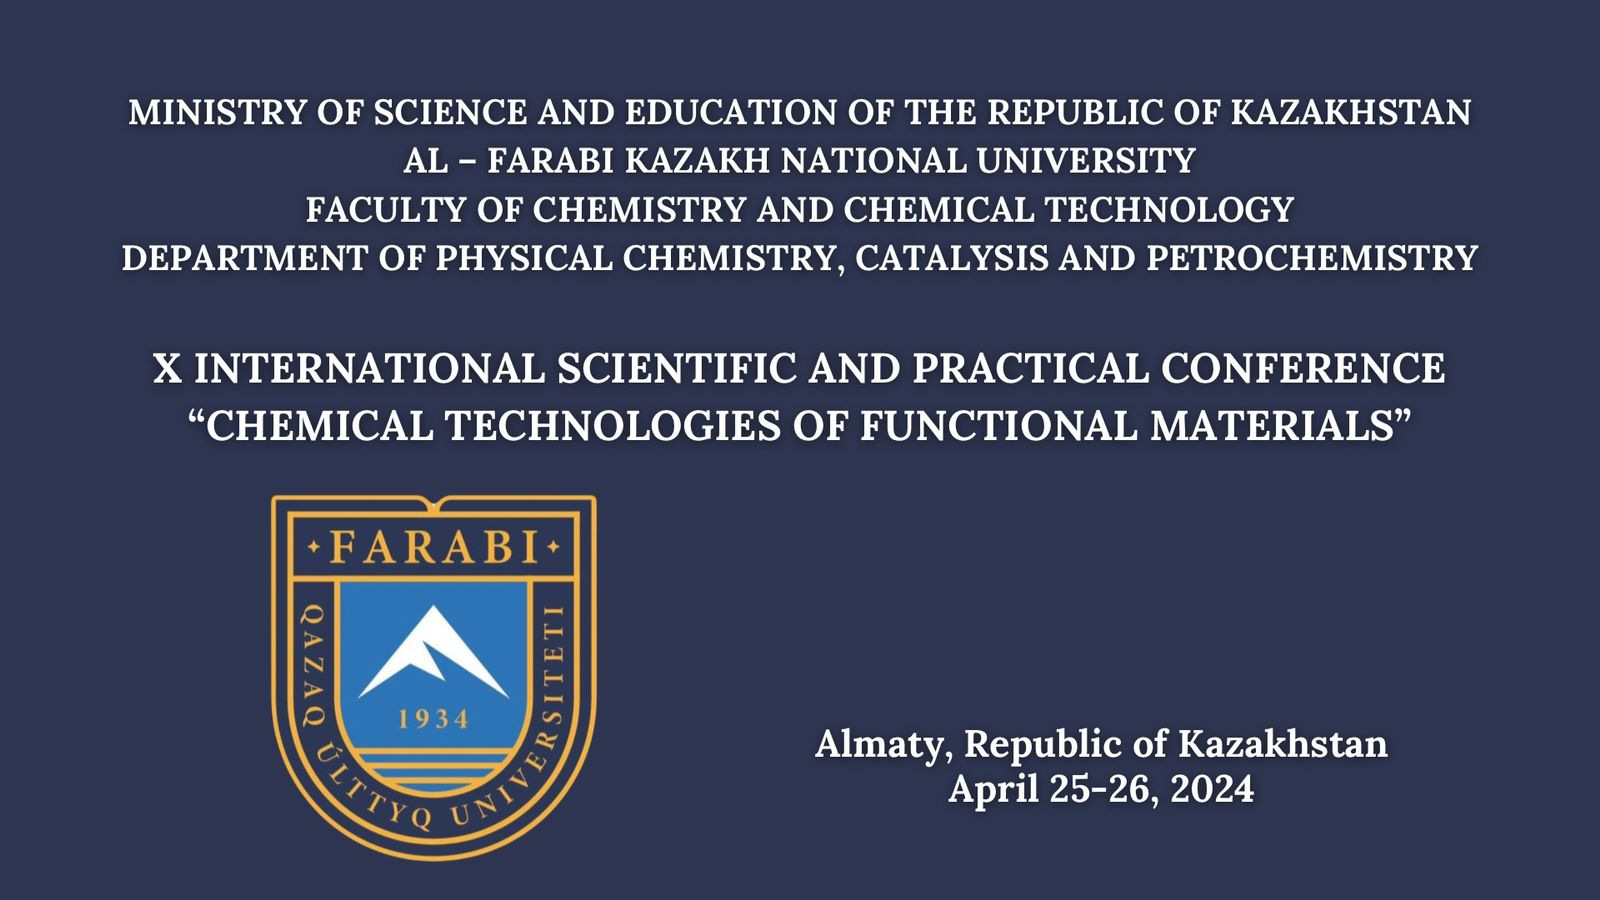 X International Russian-Kazakh scientific-practical conference “Chemical technologies of functional materials”, devoted to the 90th anniversary of  al-Farabi Kazakh National University April 25-26, 2024